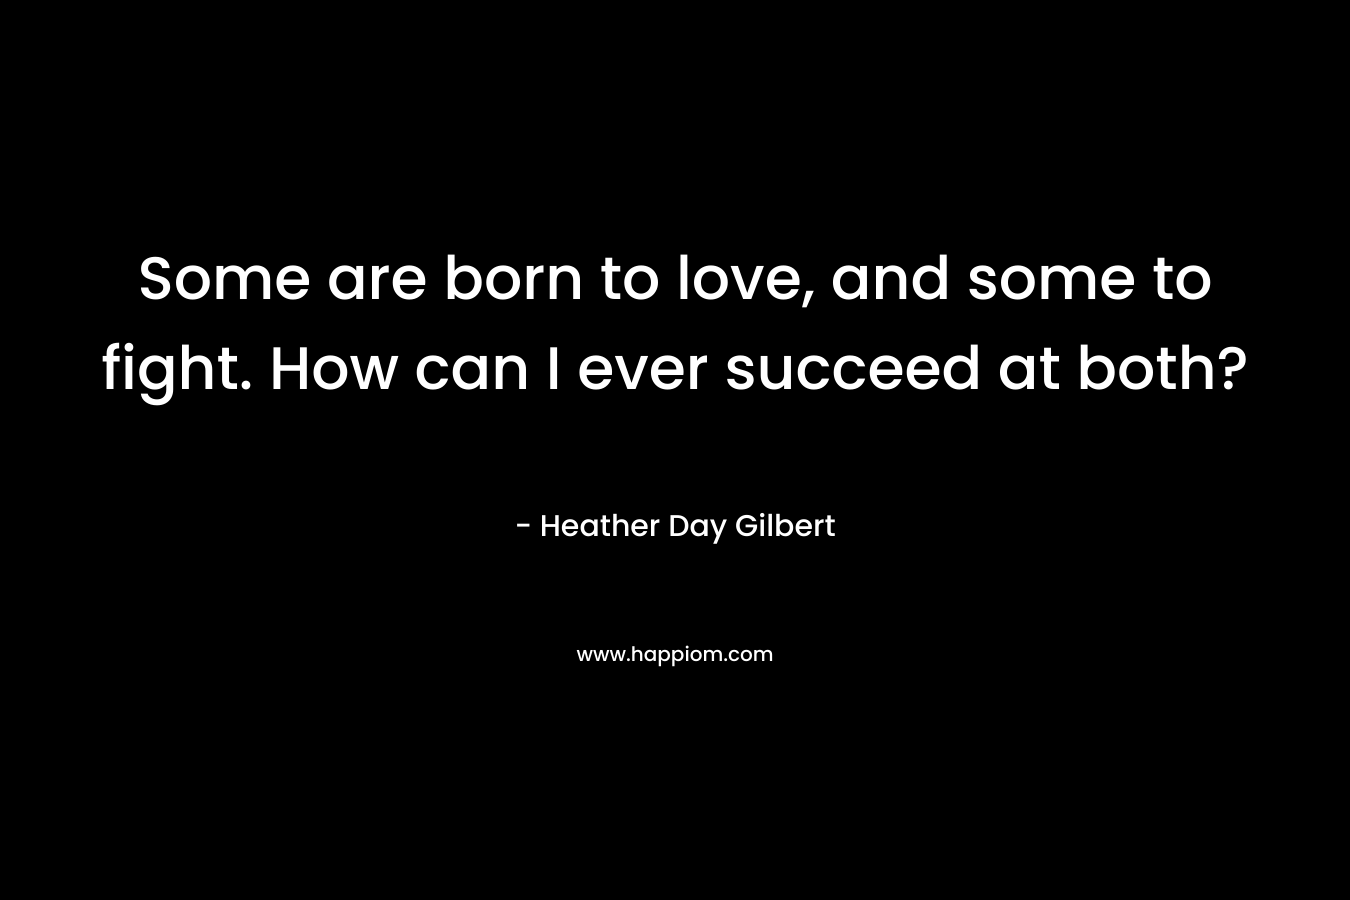 Some are born to love, and some to fight. How can I ever succeed at both? – Heather Day Gilbert